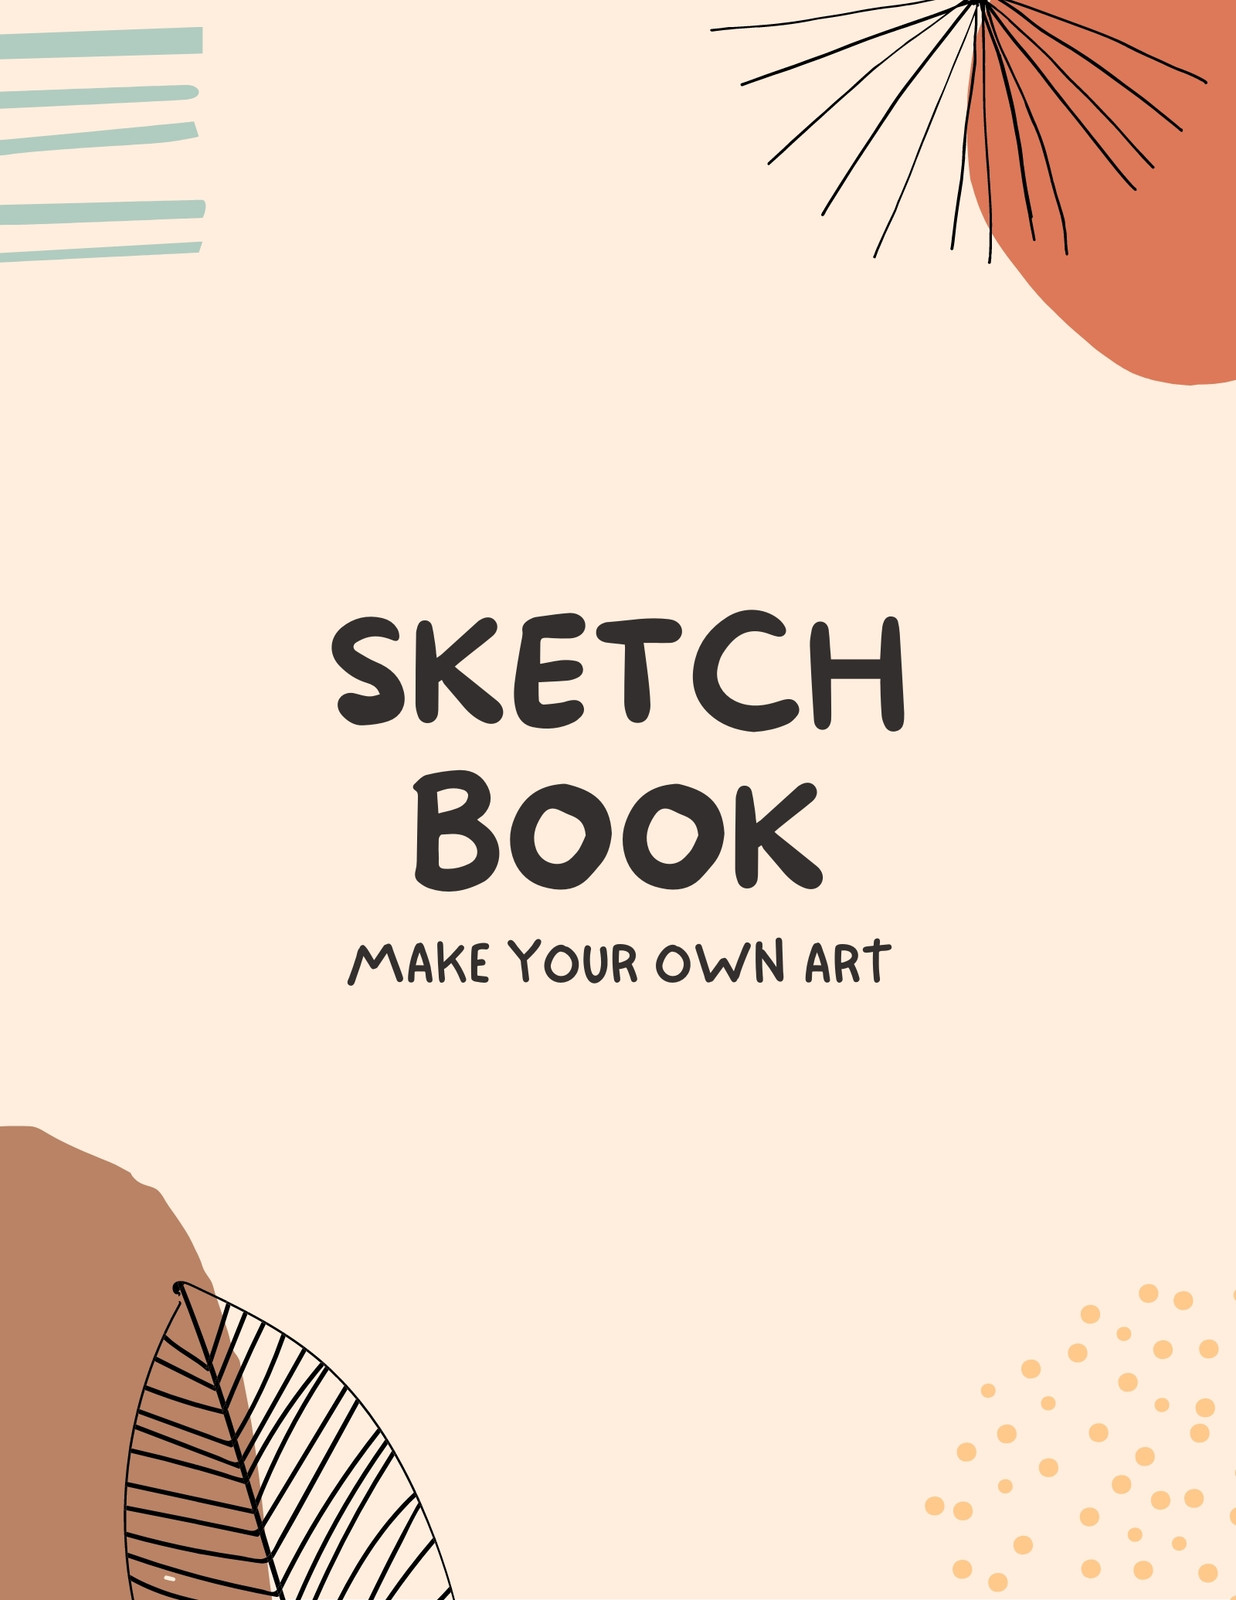 Fashion Sketchbook Canva Template Graphic by KDP Design Printable